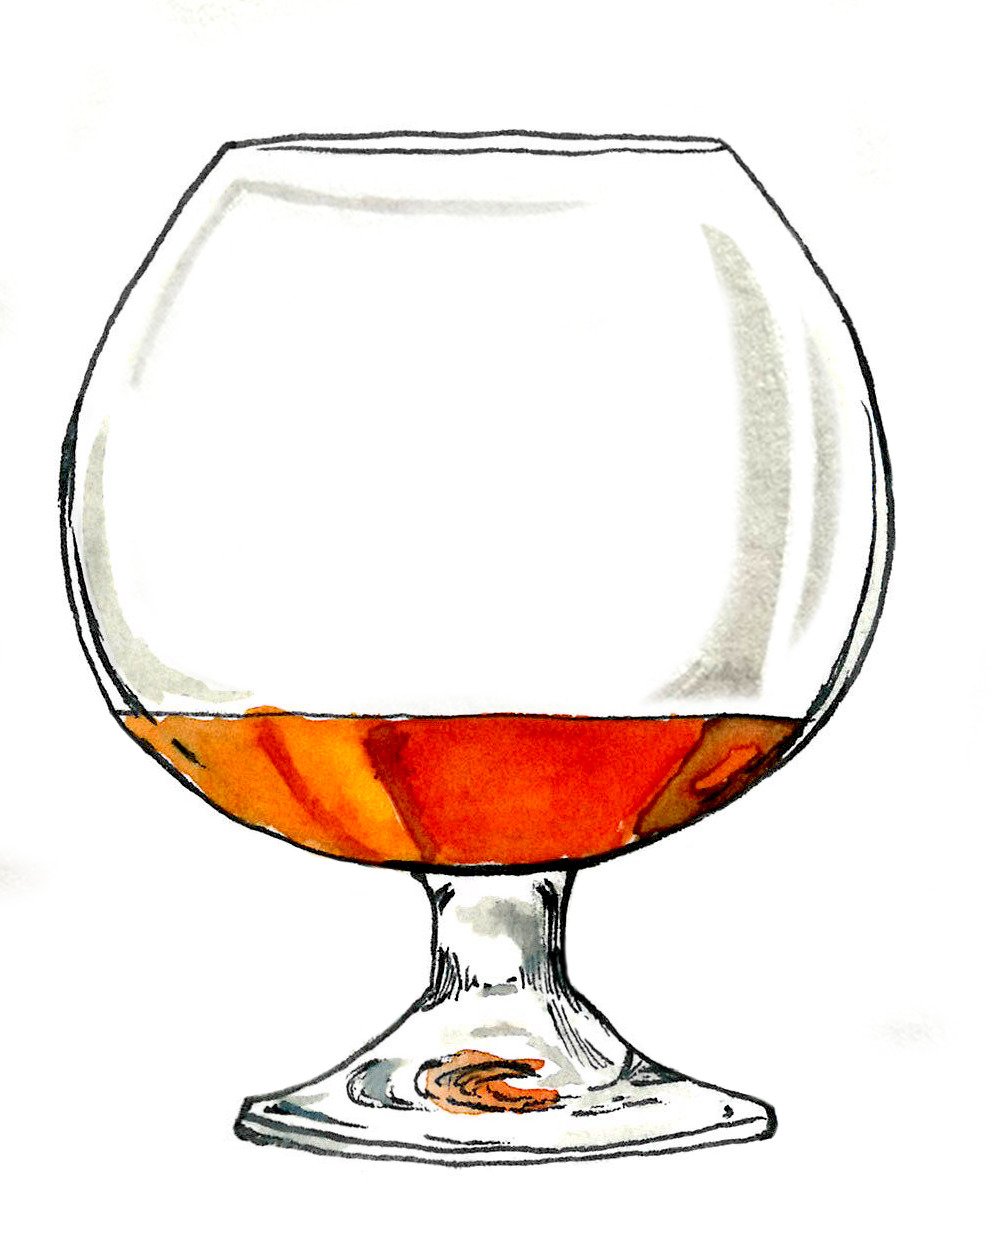 Illustration of historic alcoholic glassware Snifter 